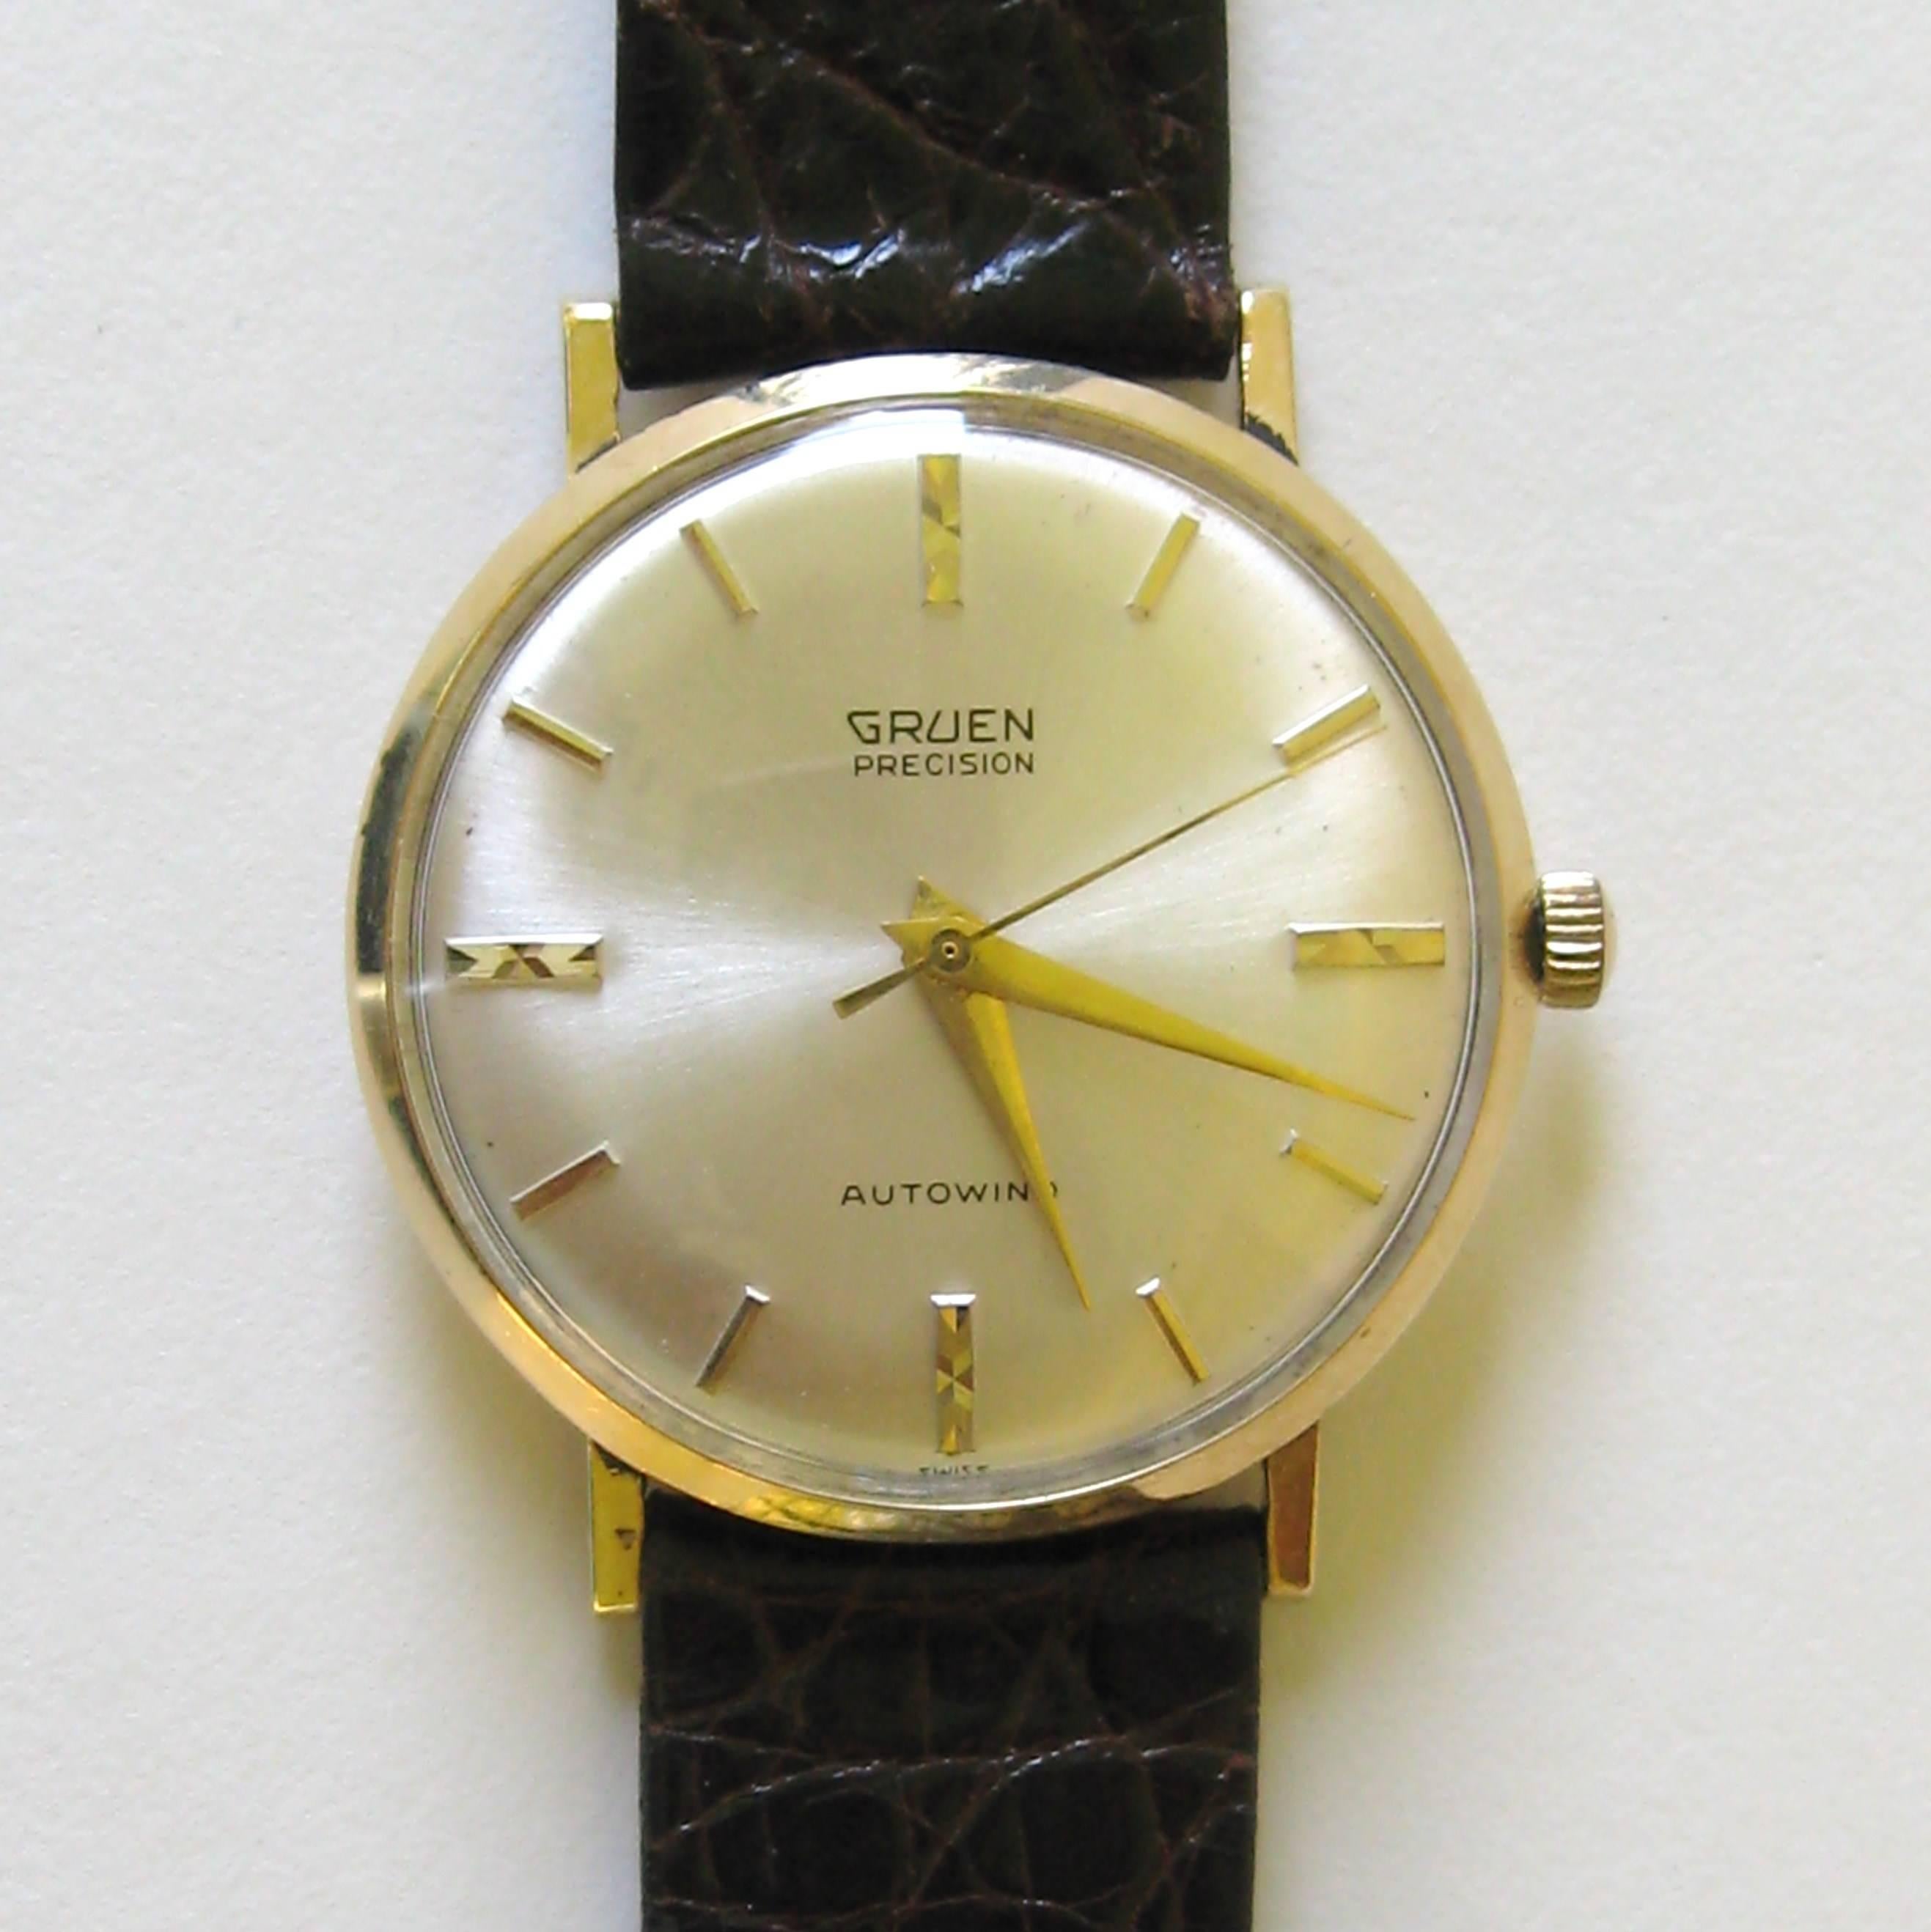  Gruen Vintage Men's watch in working condition. 18kt yellow gold 30mm case. Silvered dial with gold stick hour markers. Hours, minutes and seconds. 18k yellow gold bezel. 
Swiss movement. Alligator Strap. Be sure to check our store front for more